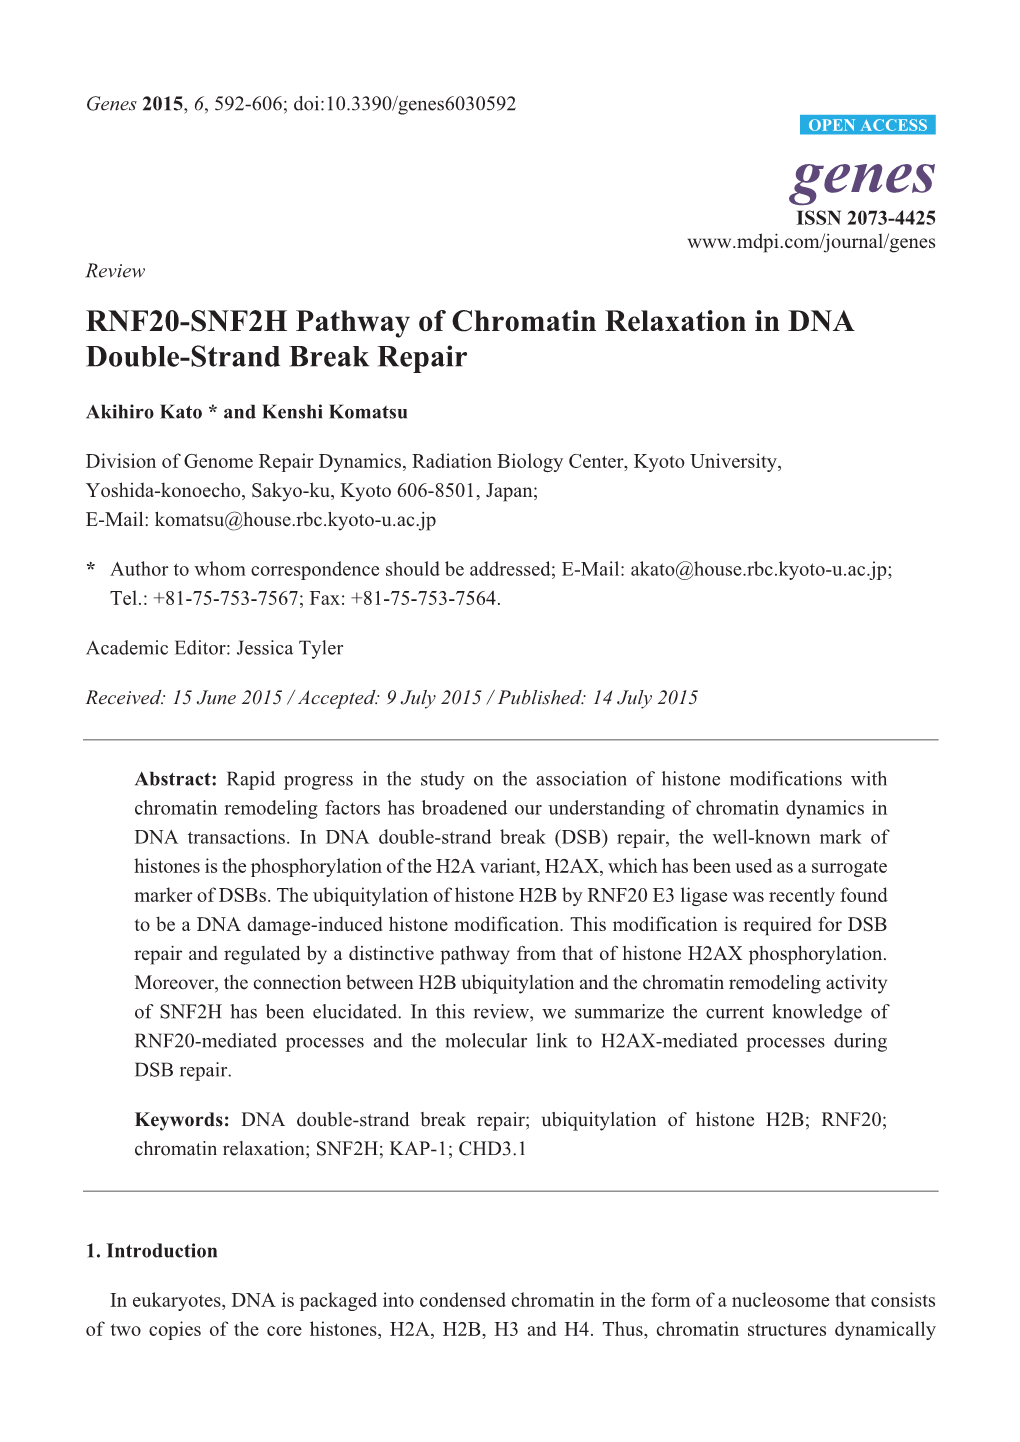 RNF20-SNF2H Pathway of Chromatin Relaxation in DNA Double-Strand Break Repair